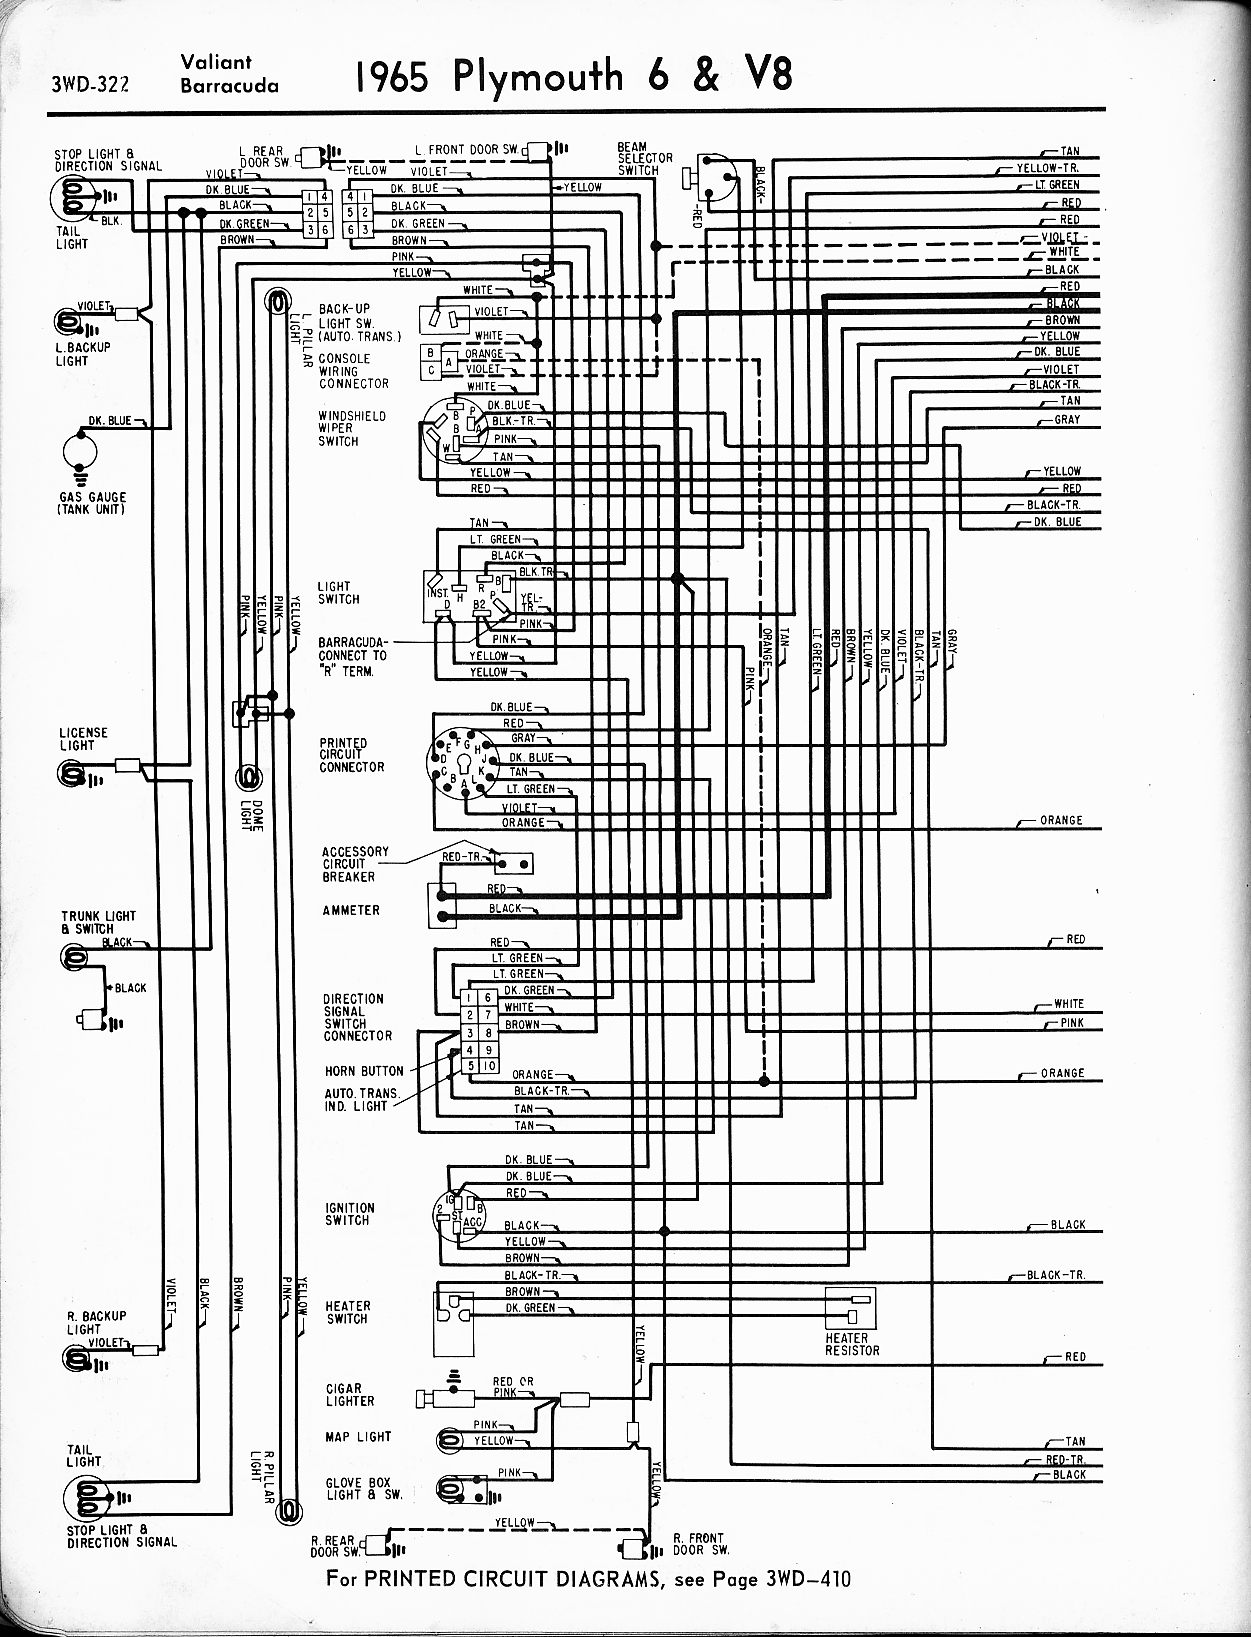 1956 - 1965 Plymouth Wiring - The Old Car Manual Project  68 Plymouth Barracuda Ignition Switch Wiring Diagram    The Old Car Manual Project